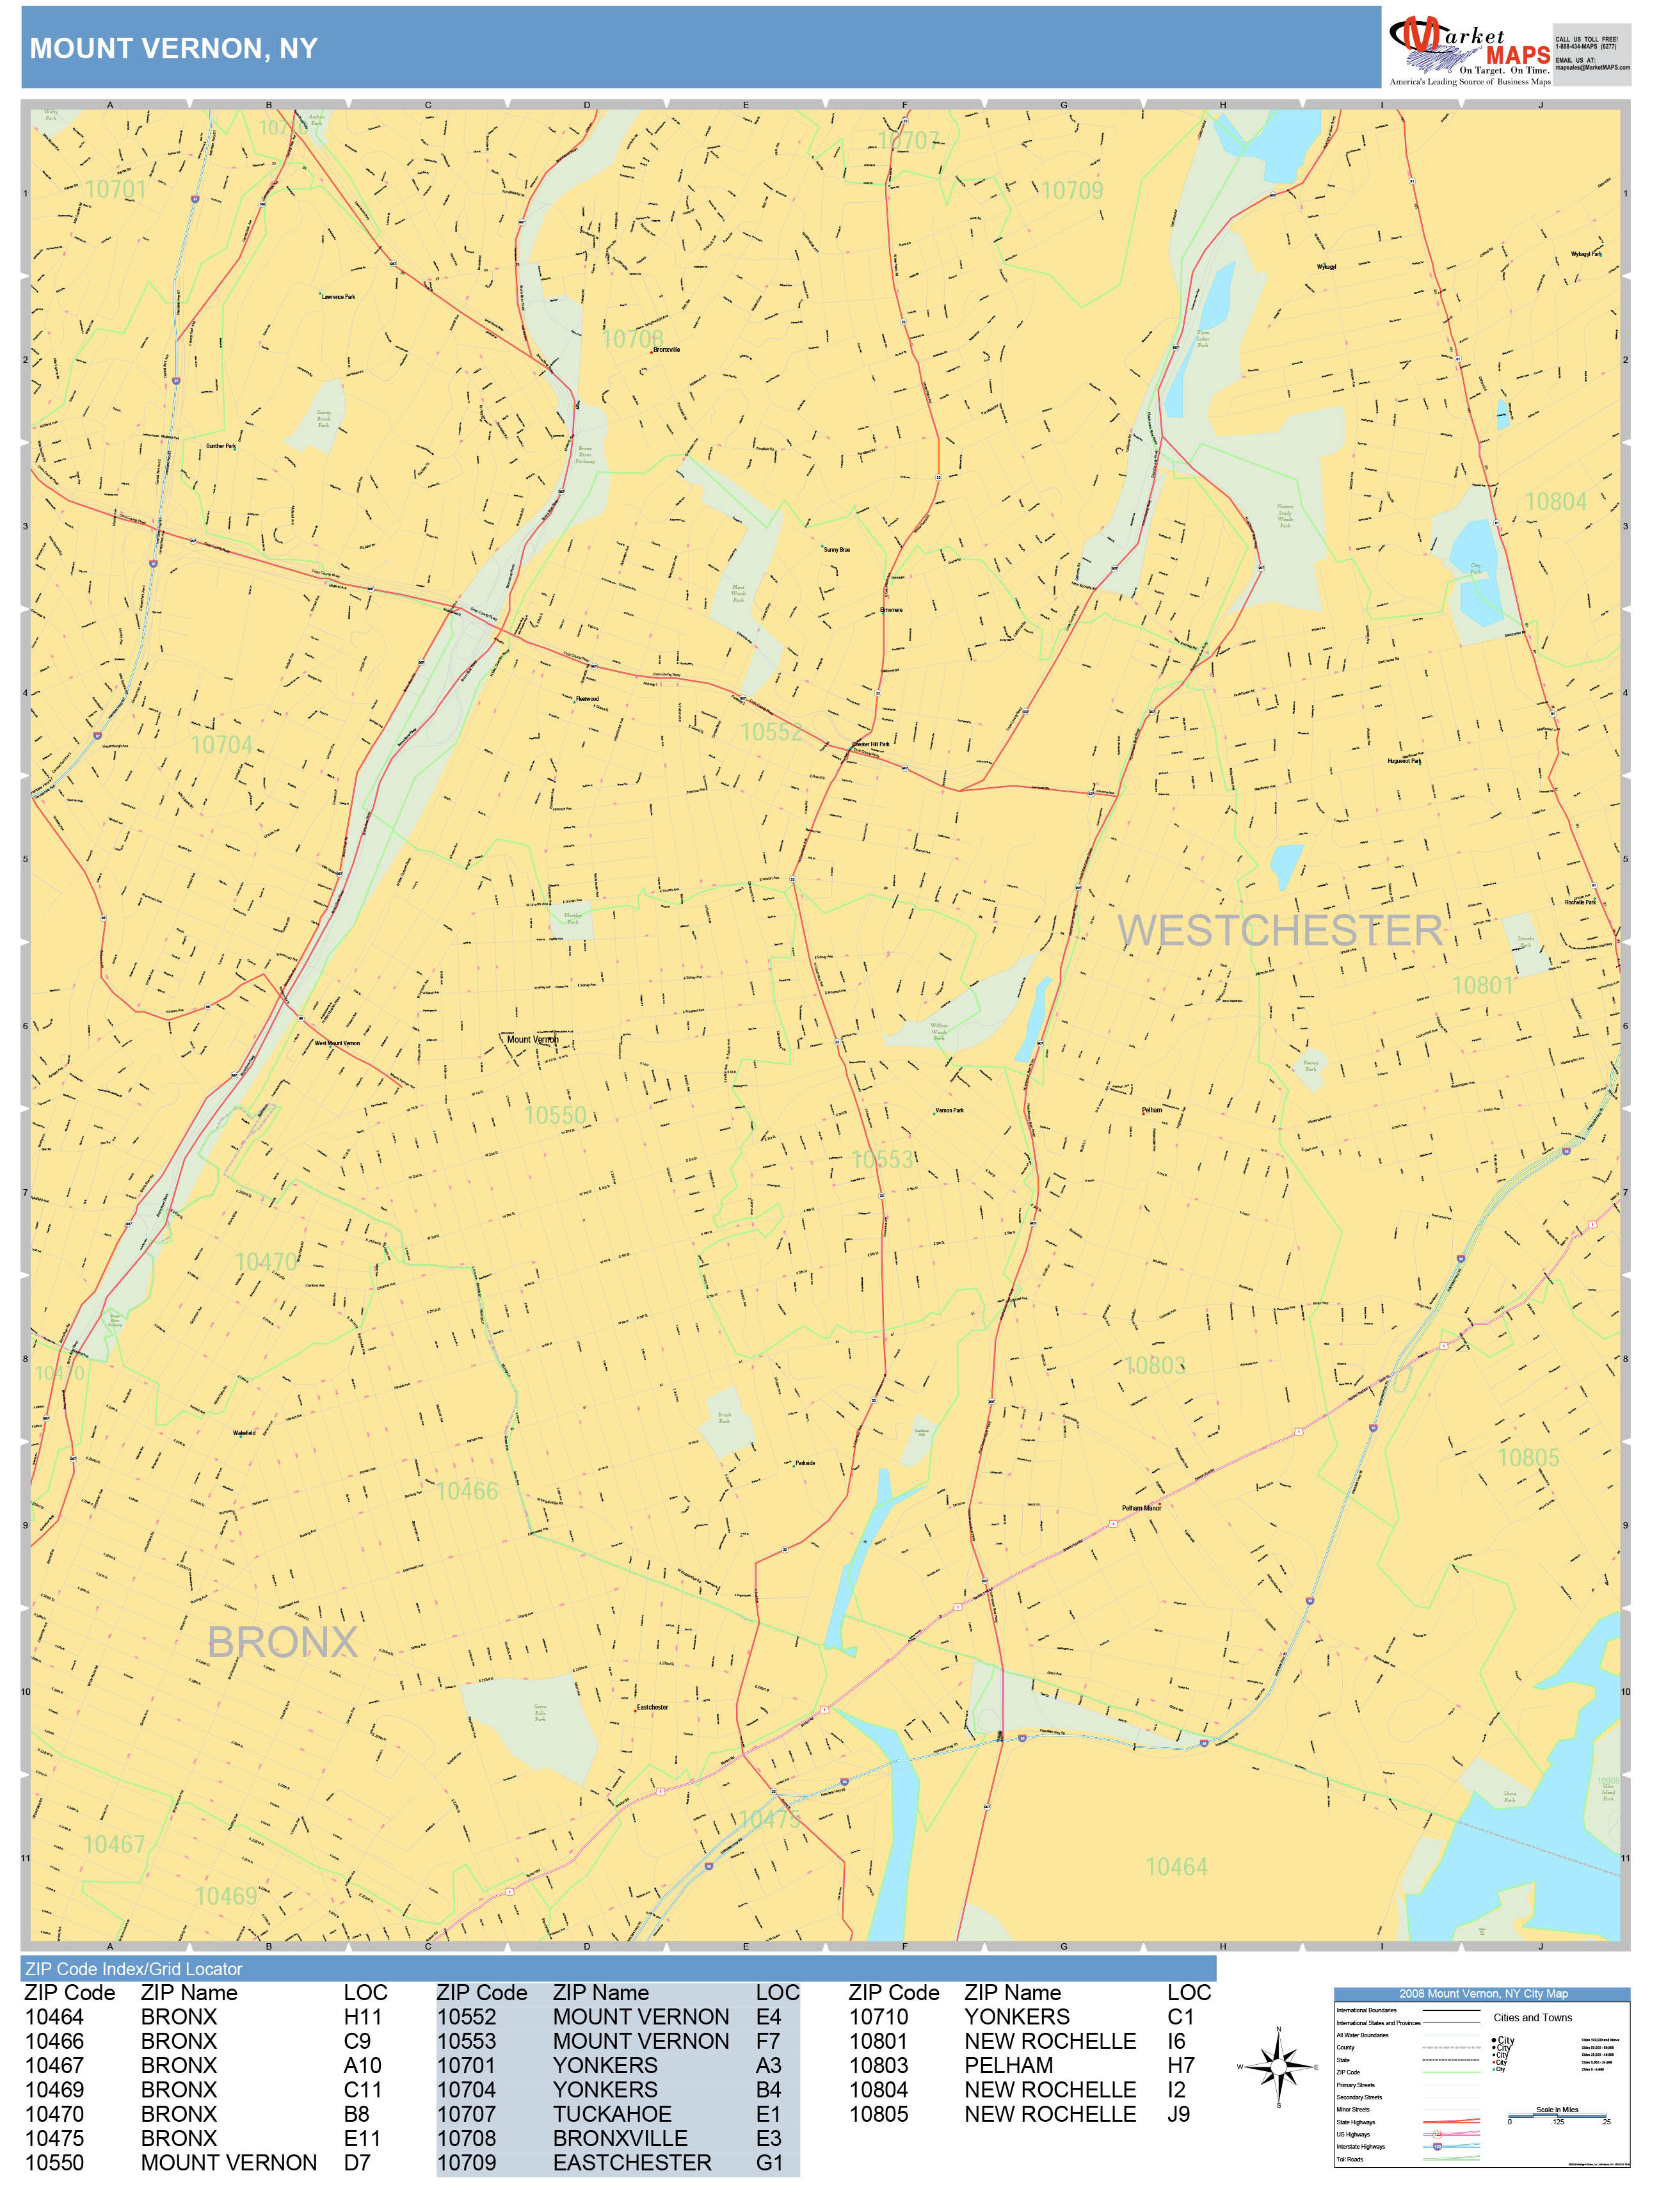 Mount Vernon New York Wall Map (Basic Style) by MarketMAPS - MapSales